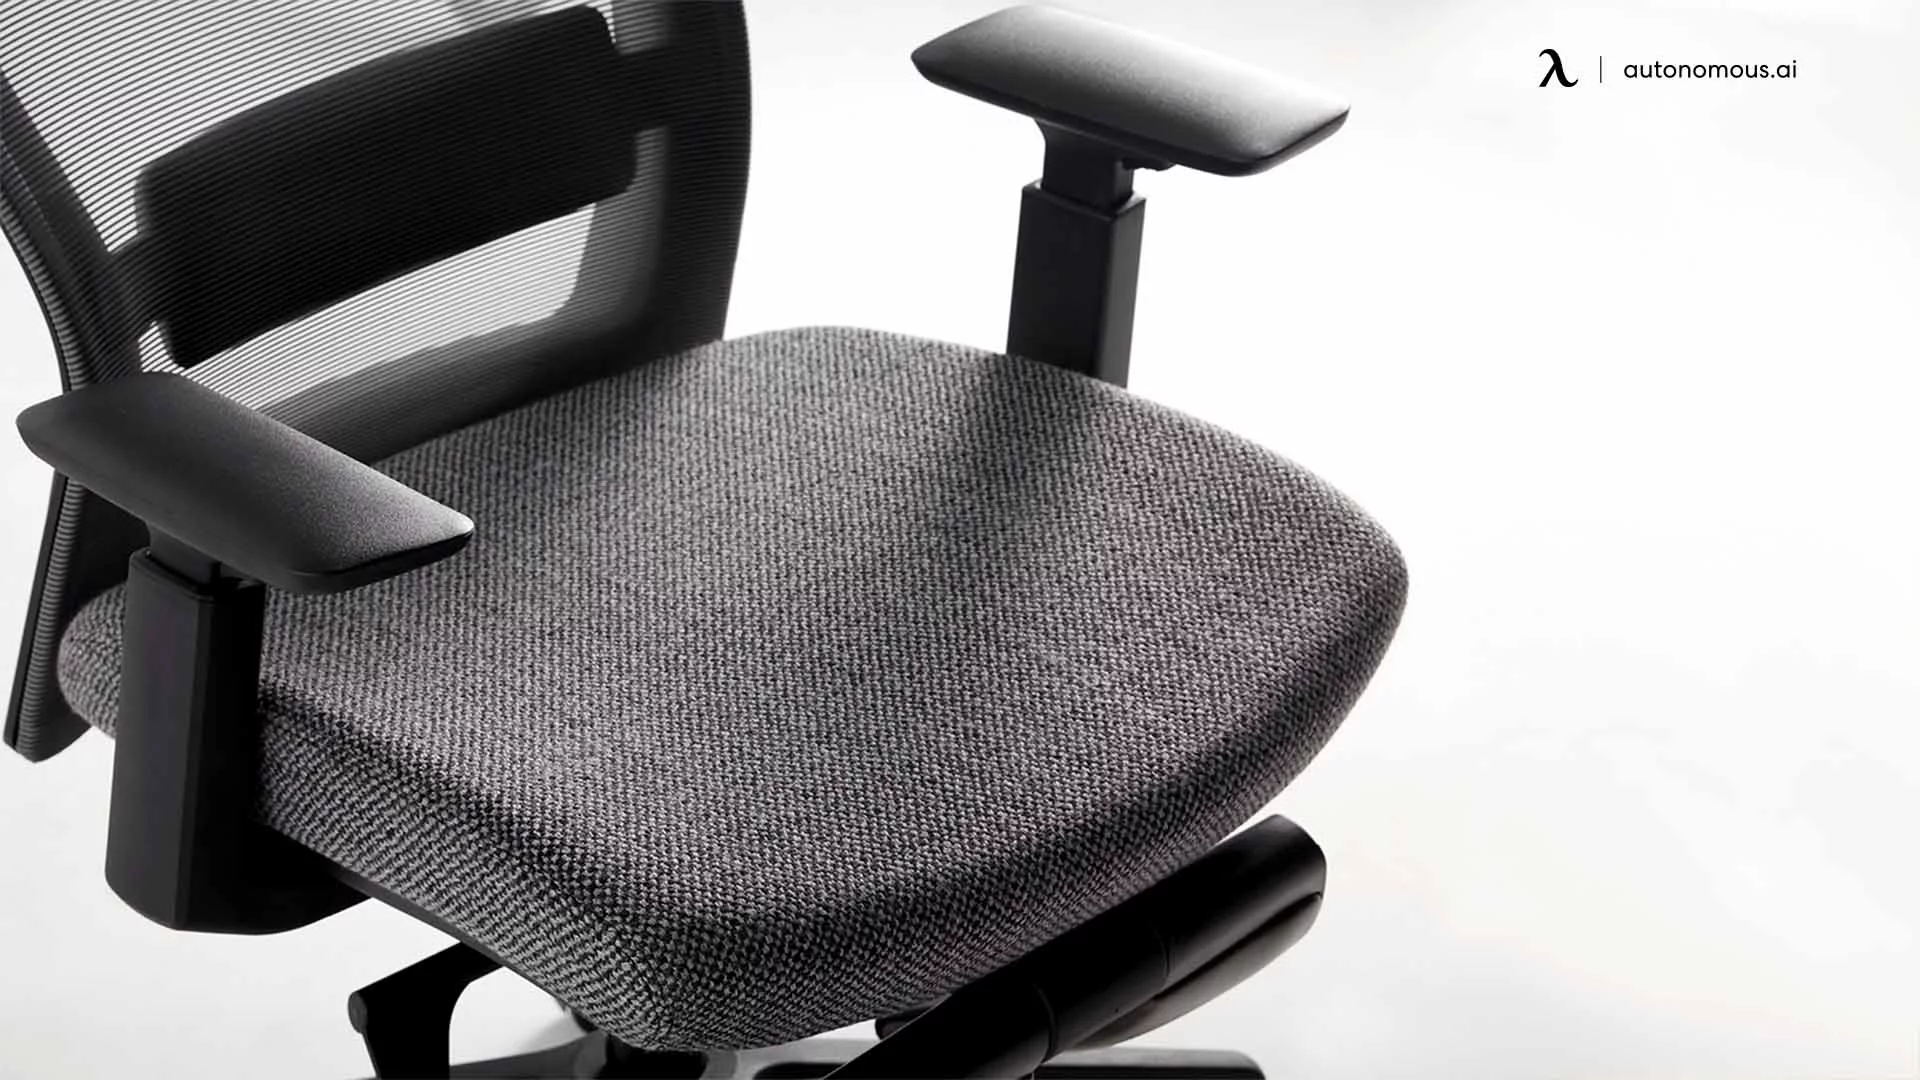 Do You Really Need a Luxury Office Chair?